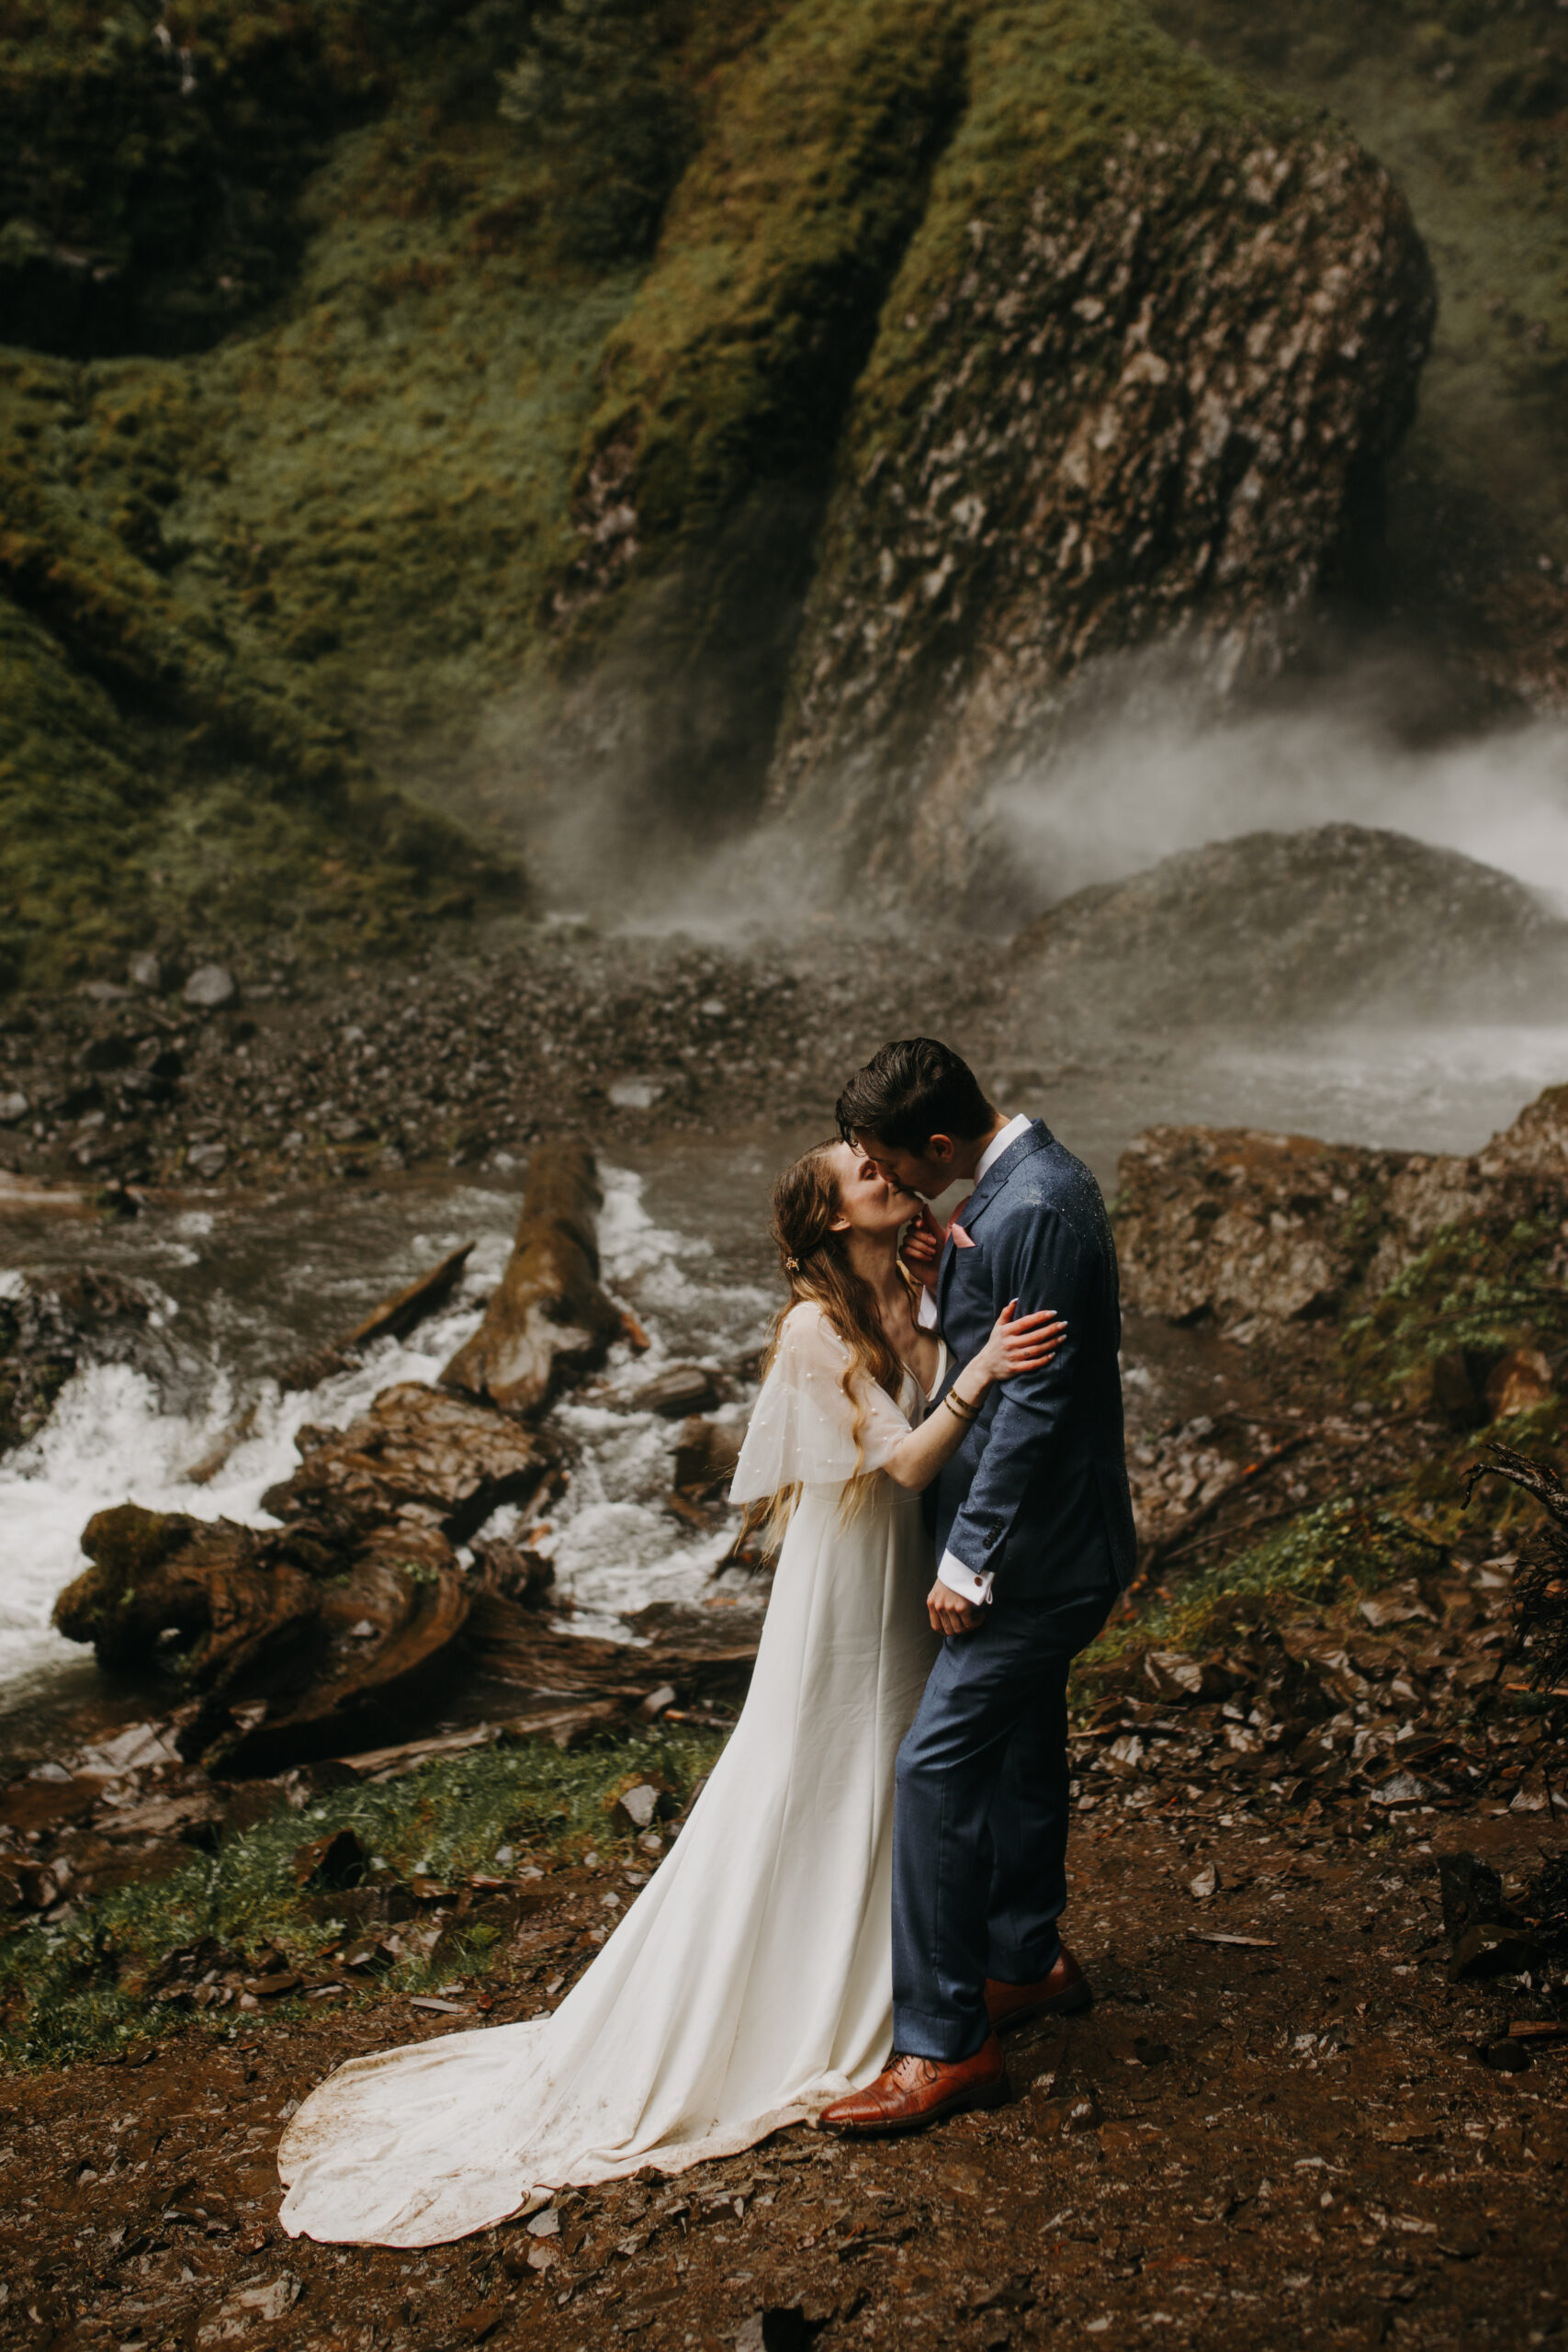 Woman in white dress kisses man in blue suit on rocky shores at Latourell falls in the Columbia River Gorge